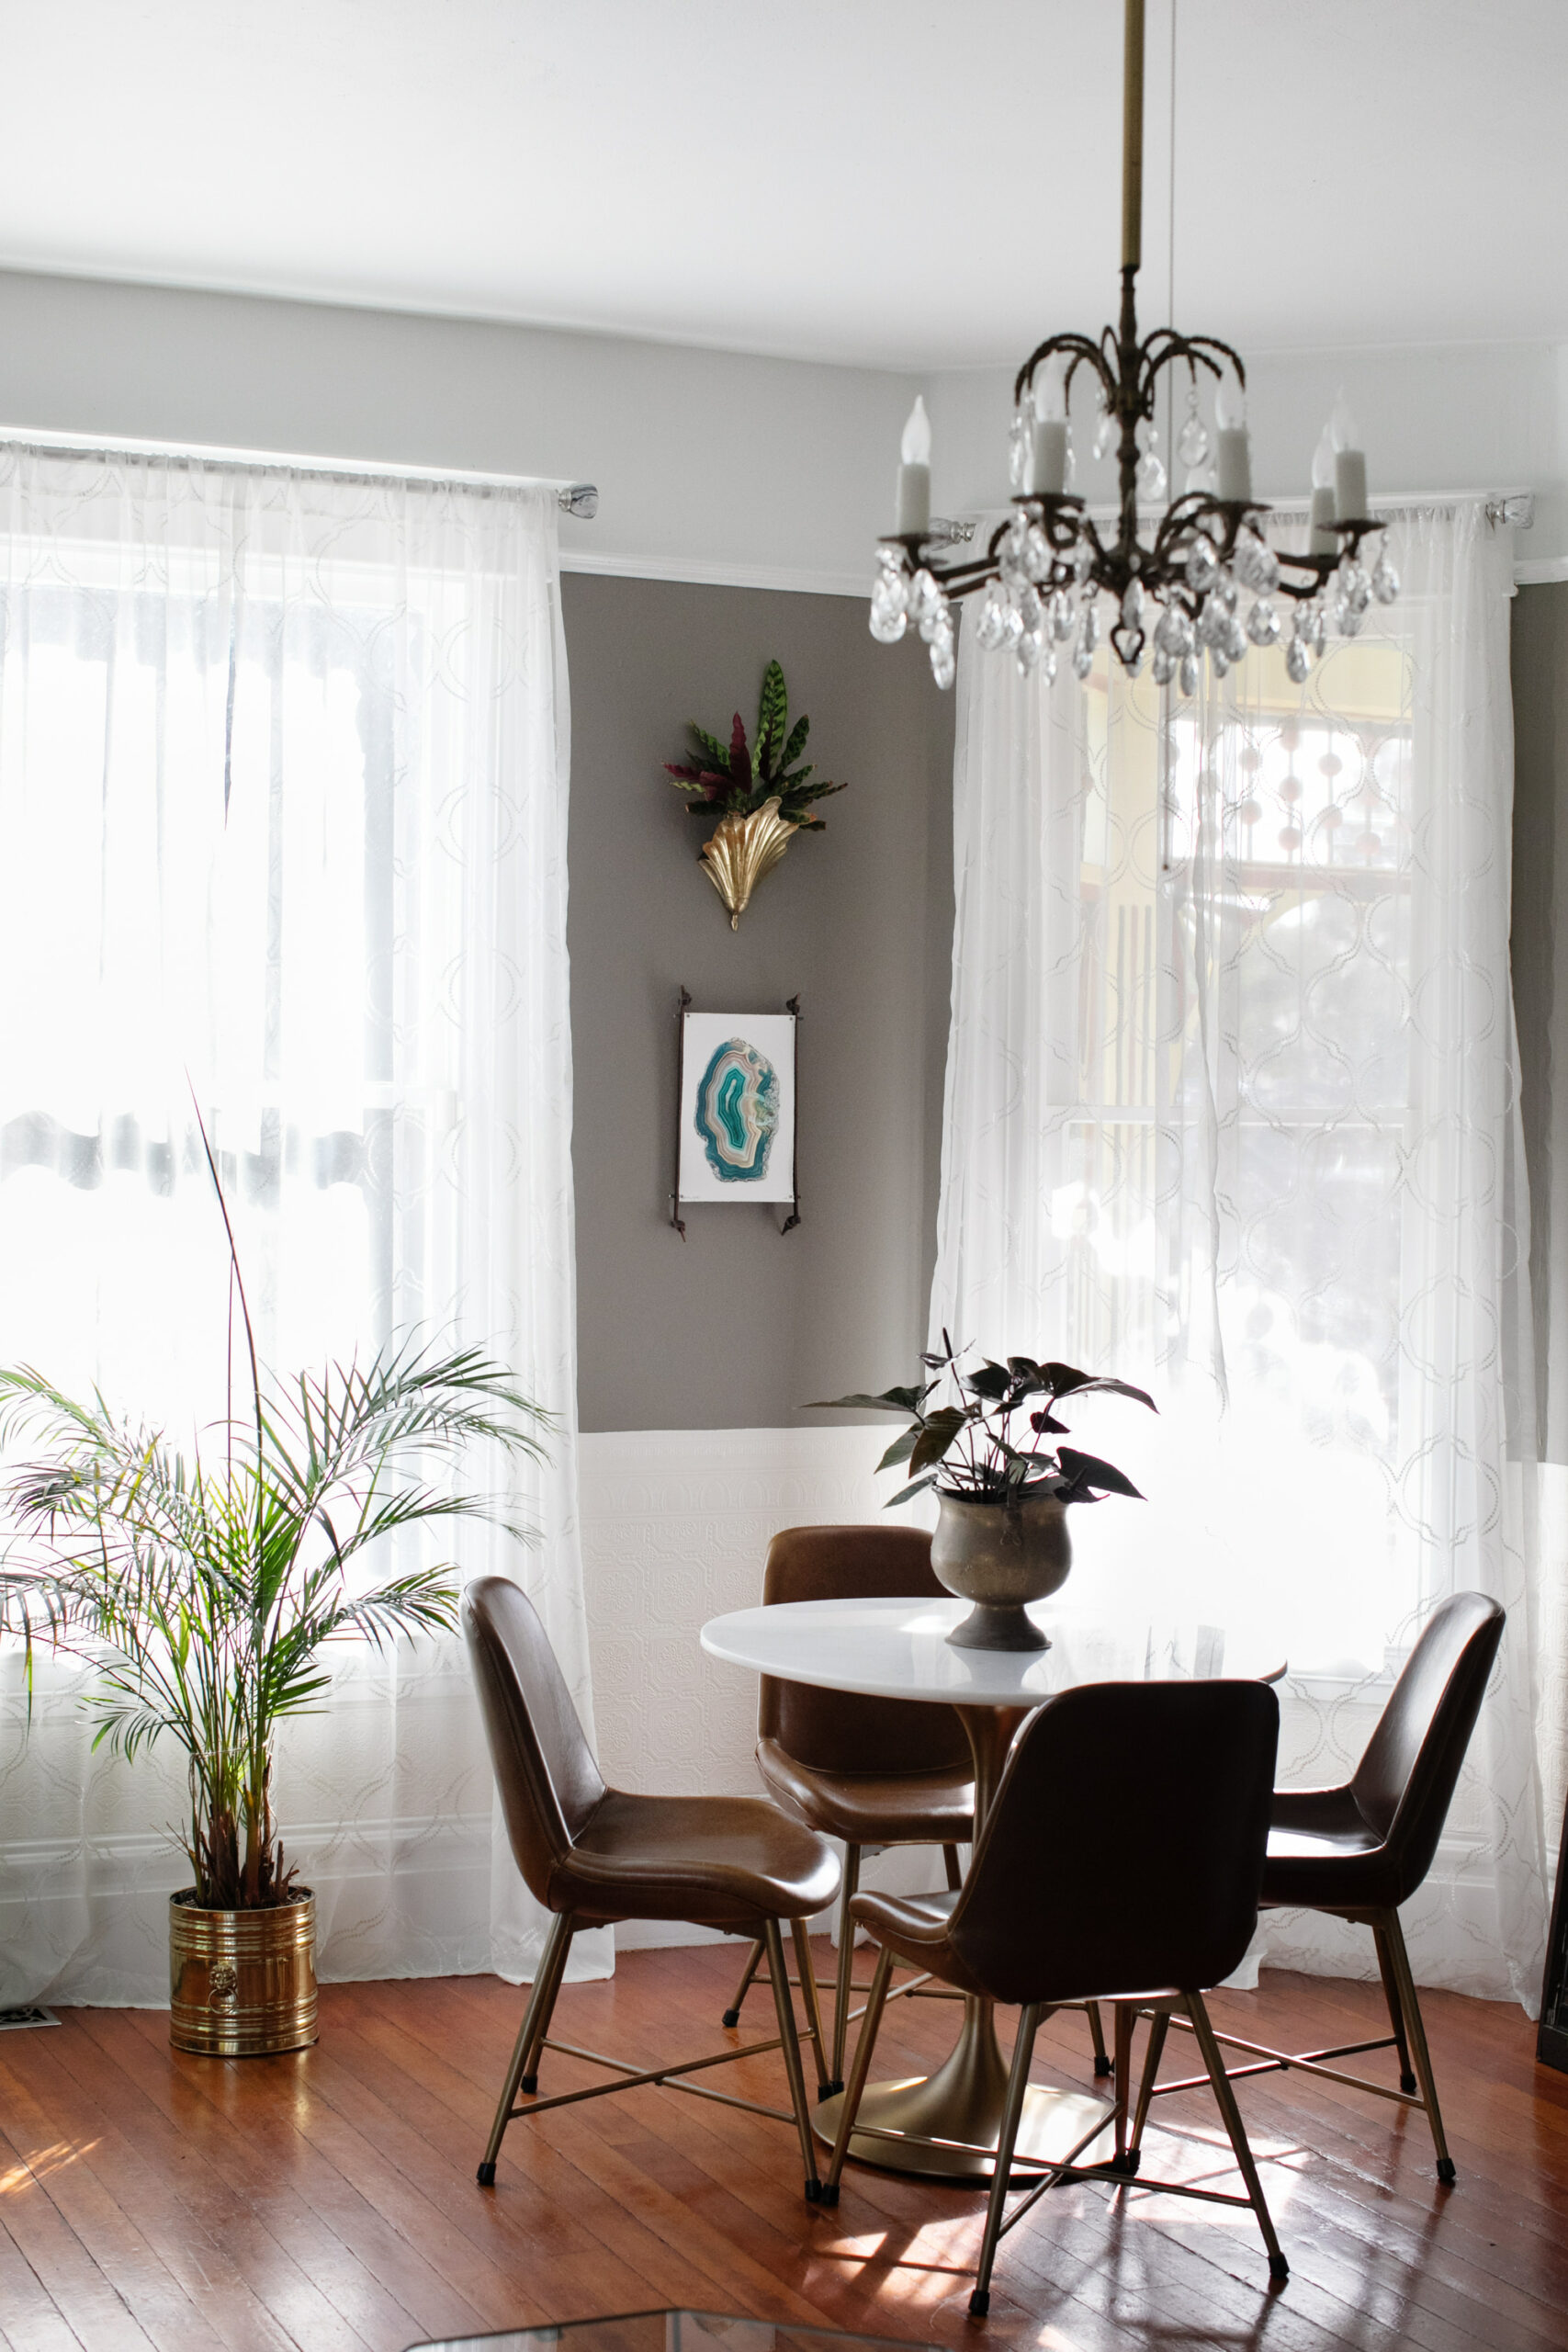 A small dining area, above, started with a mid-century table and chairs. (Eileen Roche/for Sonoma Magazine)